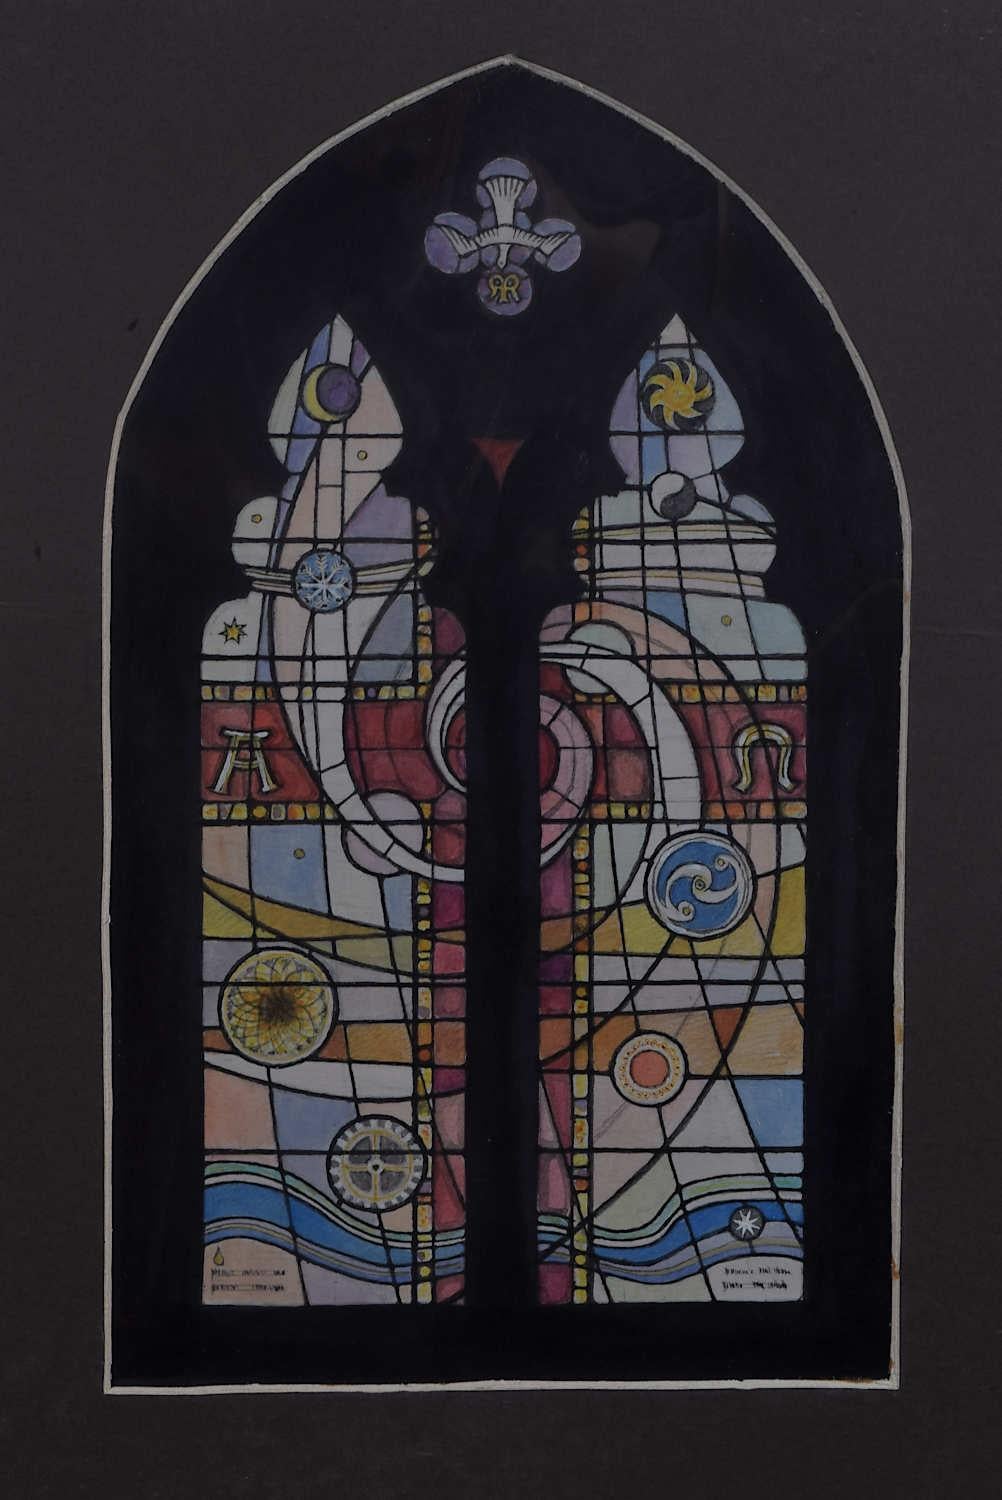 We acquired a series of watercolour stained glass designs from Jane Gray's studio. To find more scroll down to "More from this Seller" and below it click on "See all from this seller." 

Jane Gray (b.1931)
Stained Glass Design
Watercolour
23 x 13.5